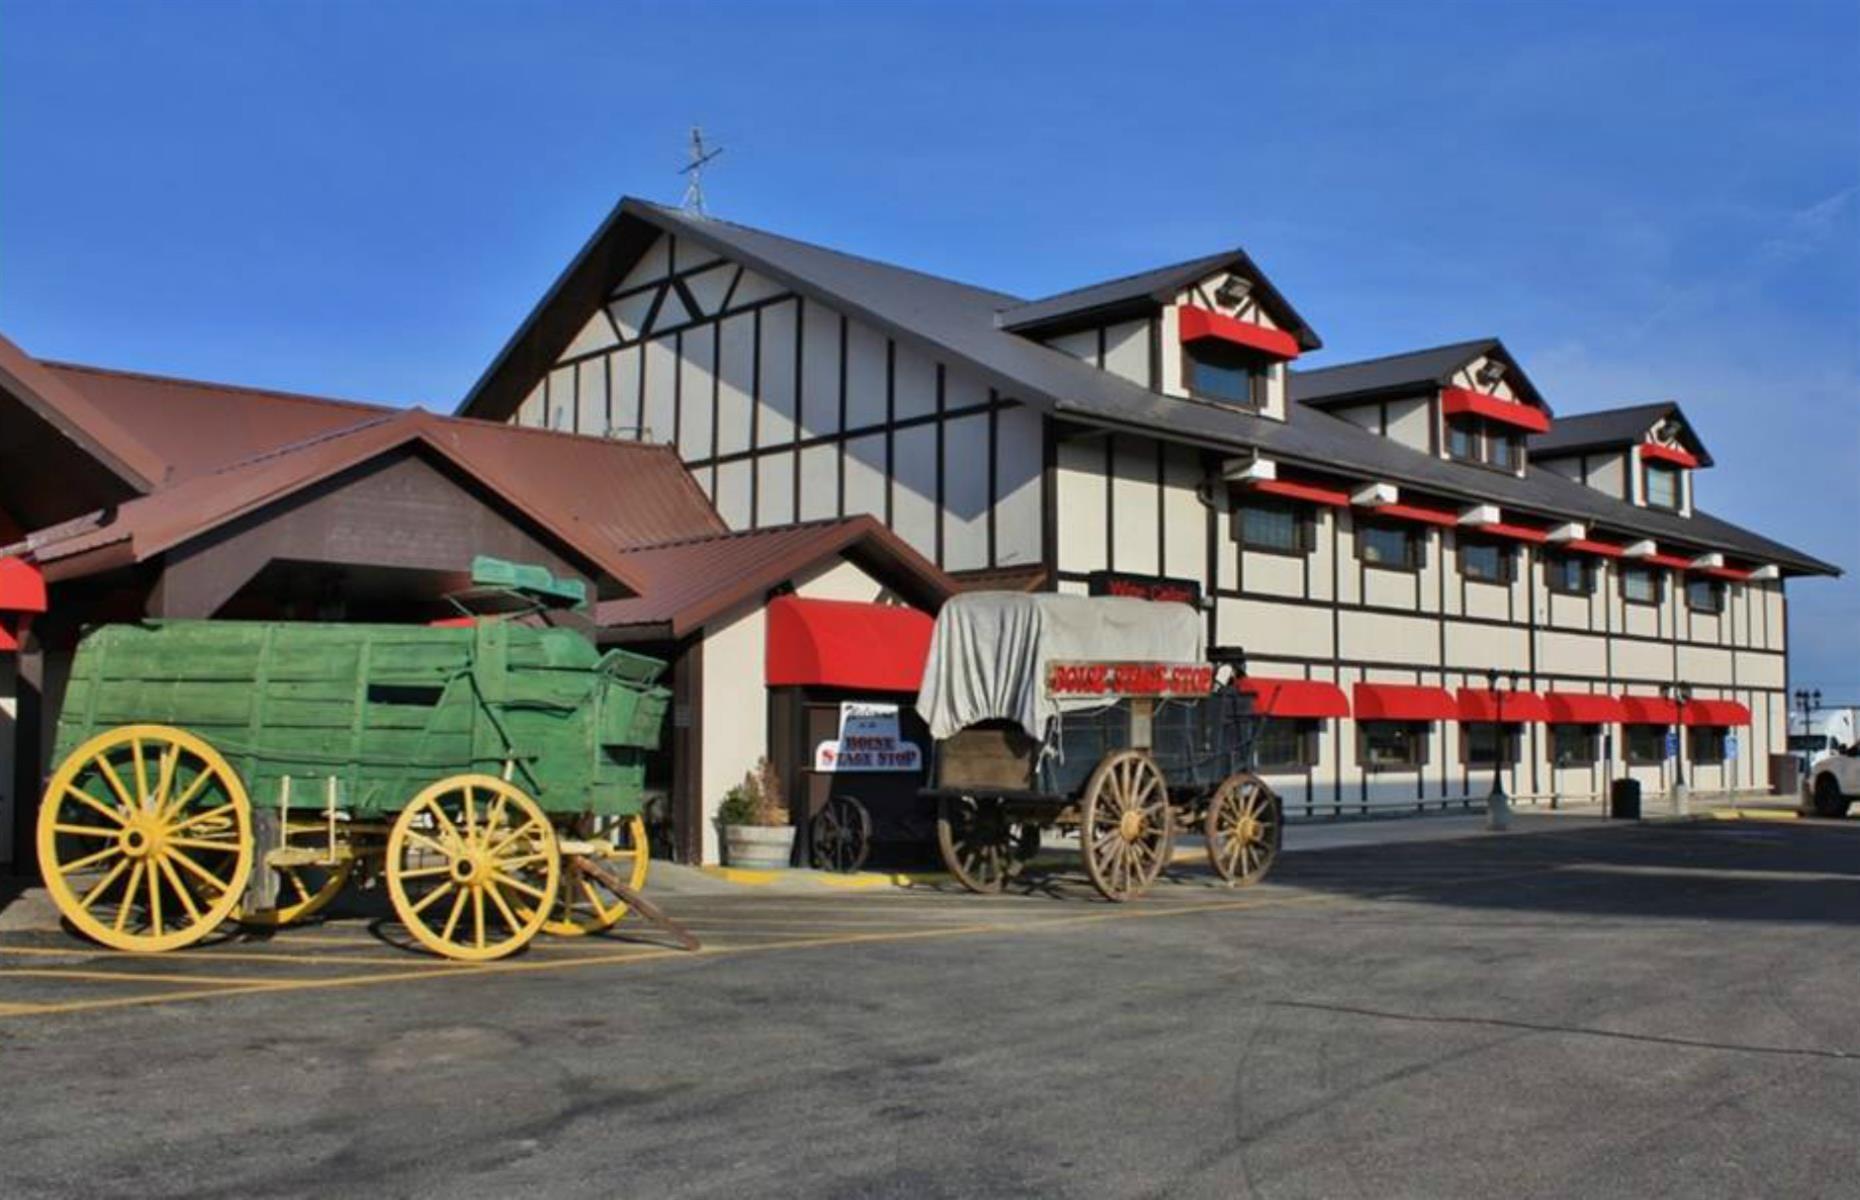 <p>Stop by one of the <a href="https://www.uberfreight.com/blog/best-truck-stops-in-america">best-loved truck stops</a> in the US, Boise Stage Stop. It opened in 1891, making it one of the oldest businesses in Idaho. It’s known for <a href="https://www.boisestagestop.org/restaurant">its fantastic steakhouse</a> which serves sirloin with crispy shrimp and hearty burgers. You can even get a T-bone at breakfast.</p>